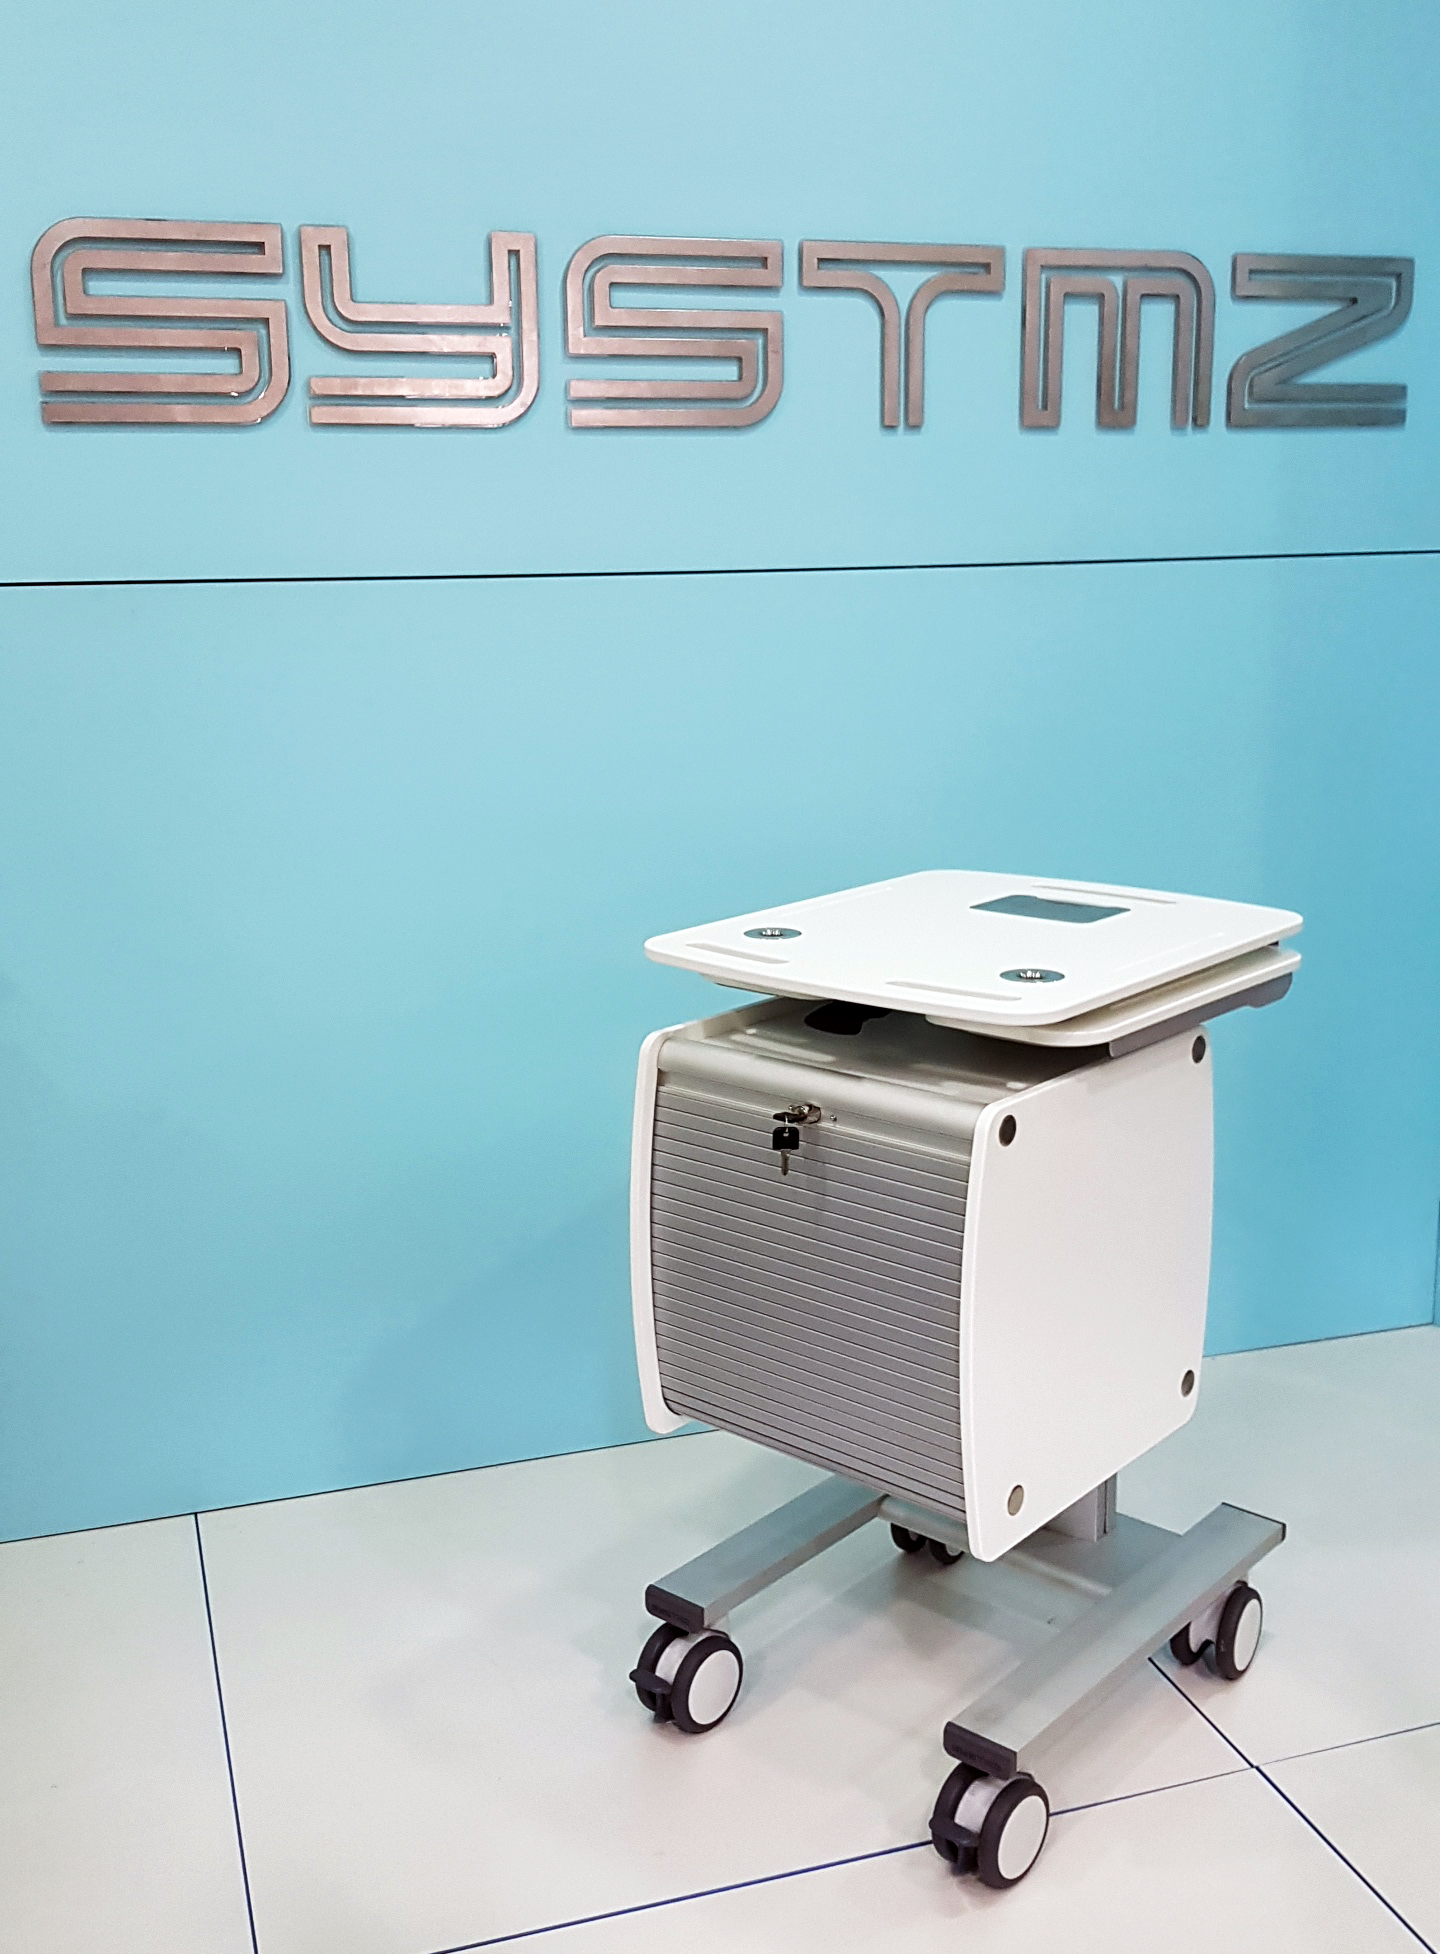 A versatile powered mobile workspace that doubles as a rigid powerstation and storage area due to it's sliding tambour door feature ergotron, sv40, sv41, sv42, sv-40, sv-41, sv-42, humanscale, cow, wow, bmw